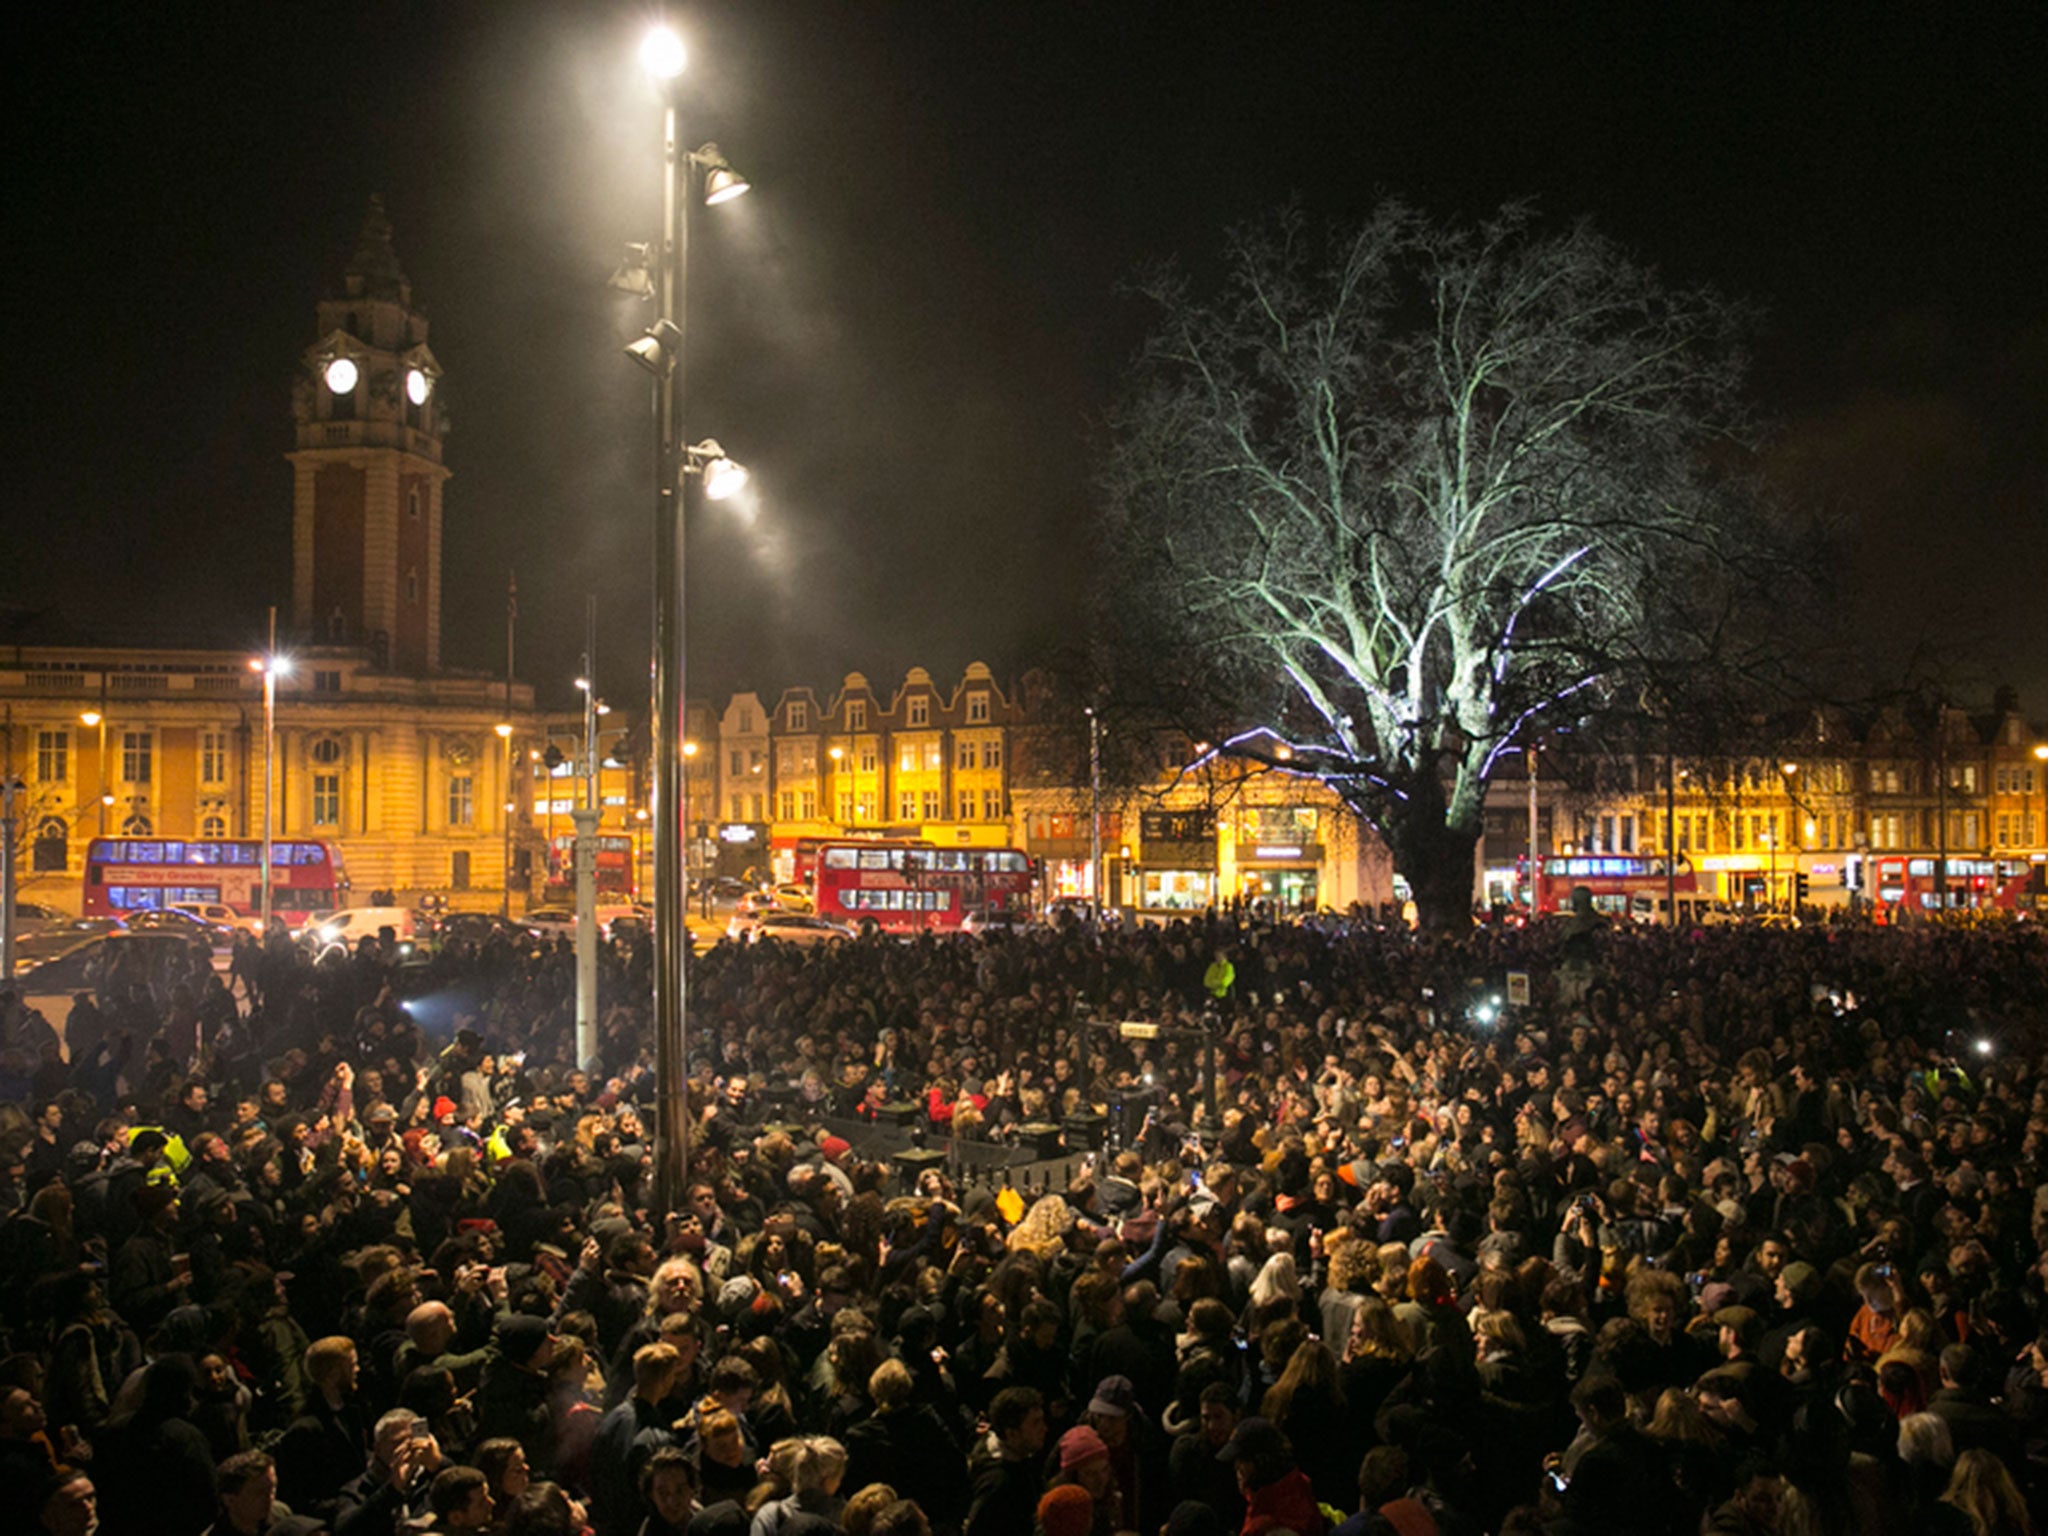 Hundreds of people congregated in Brixton, Bowie’s home town, to pay tribute